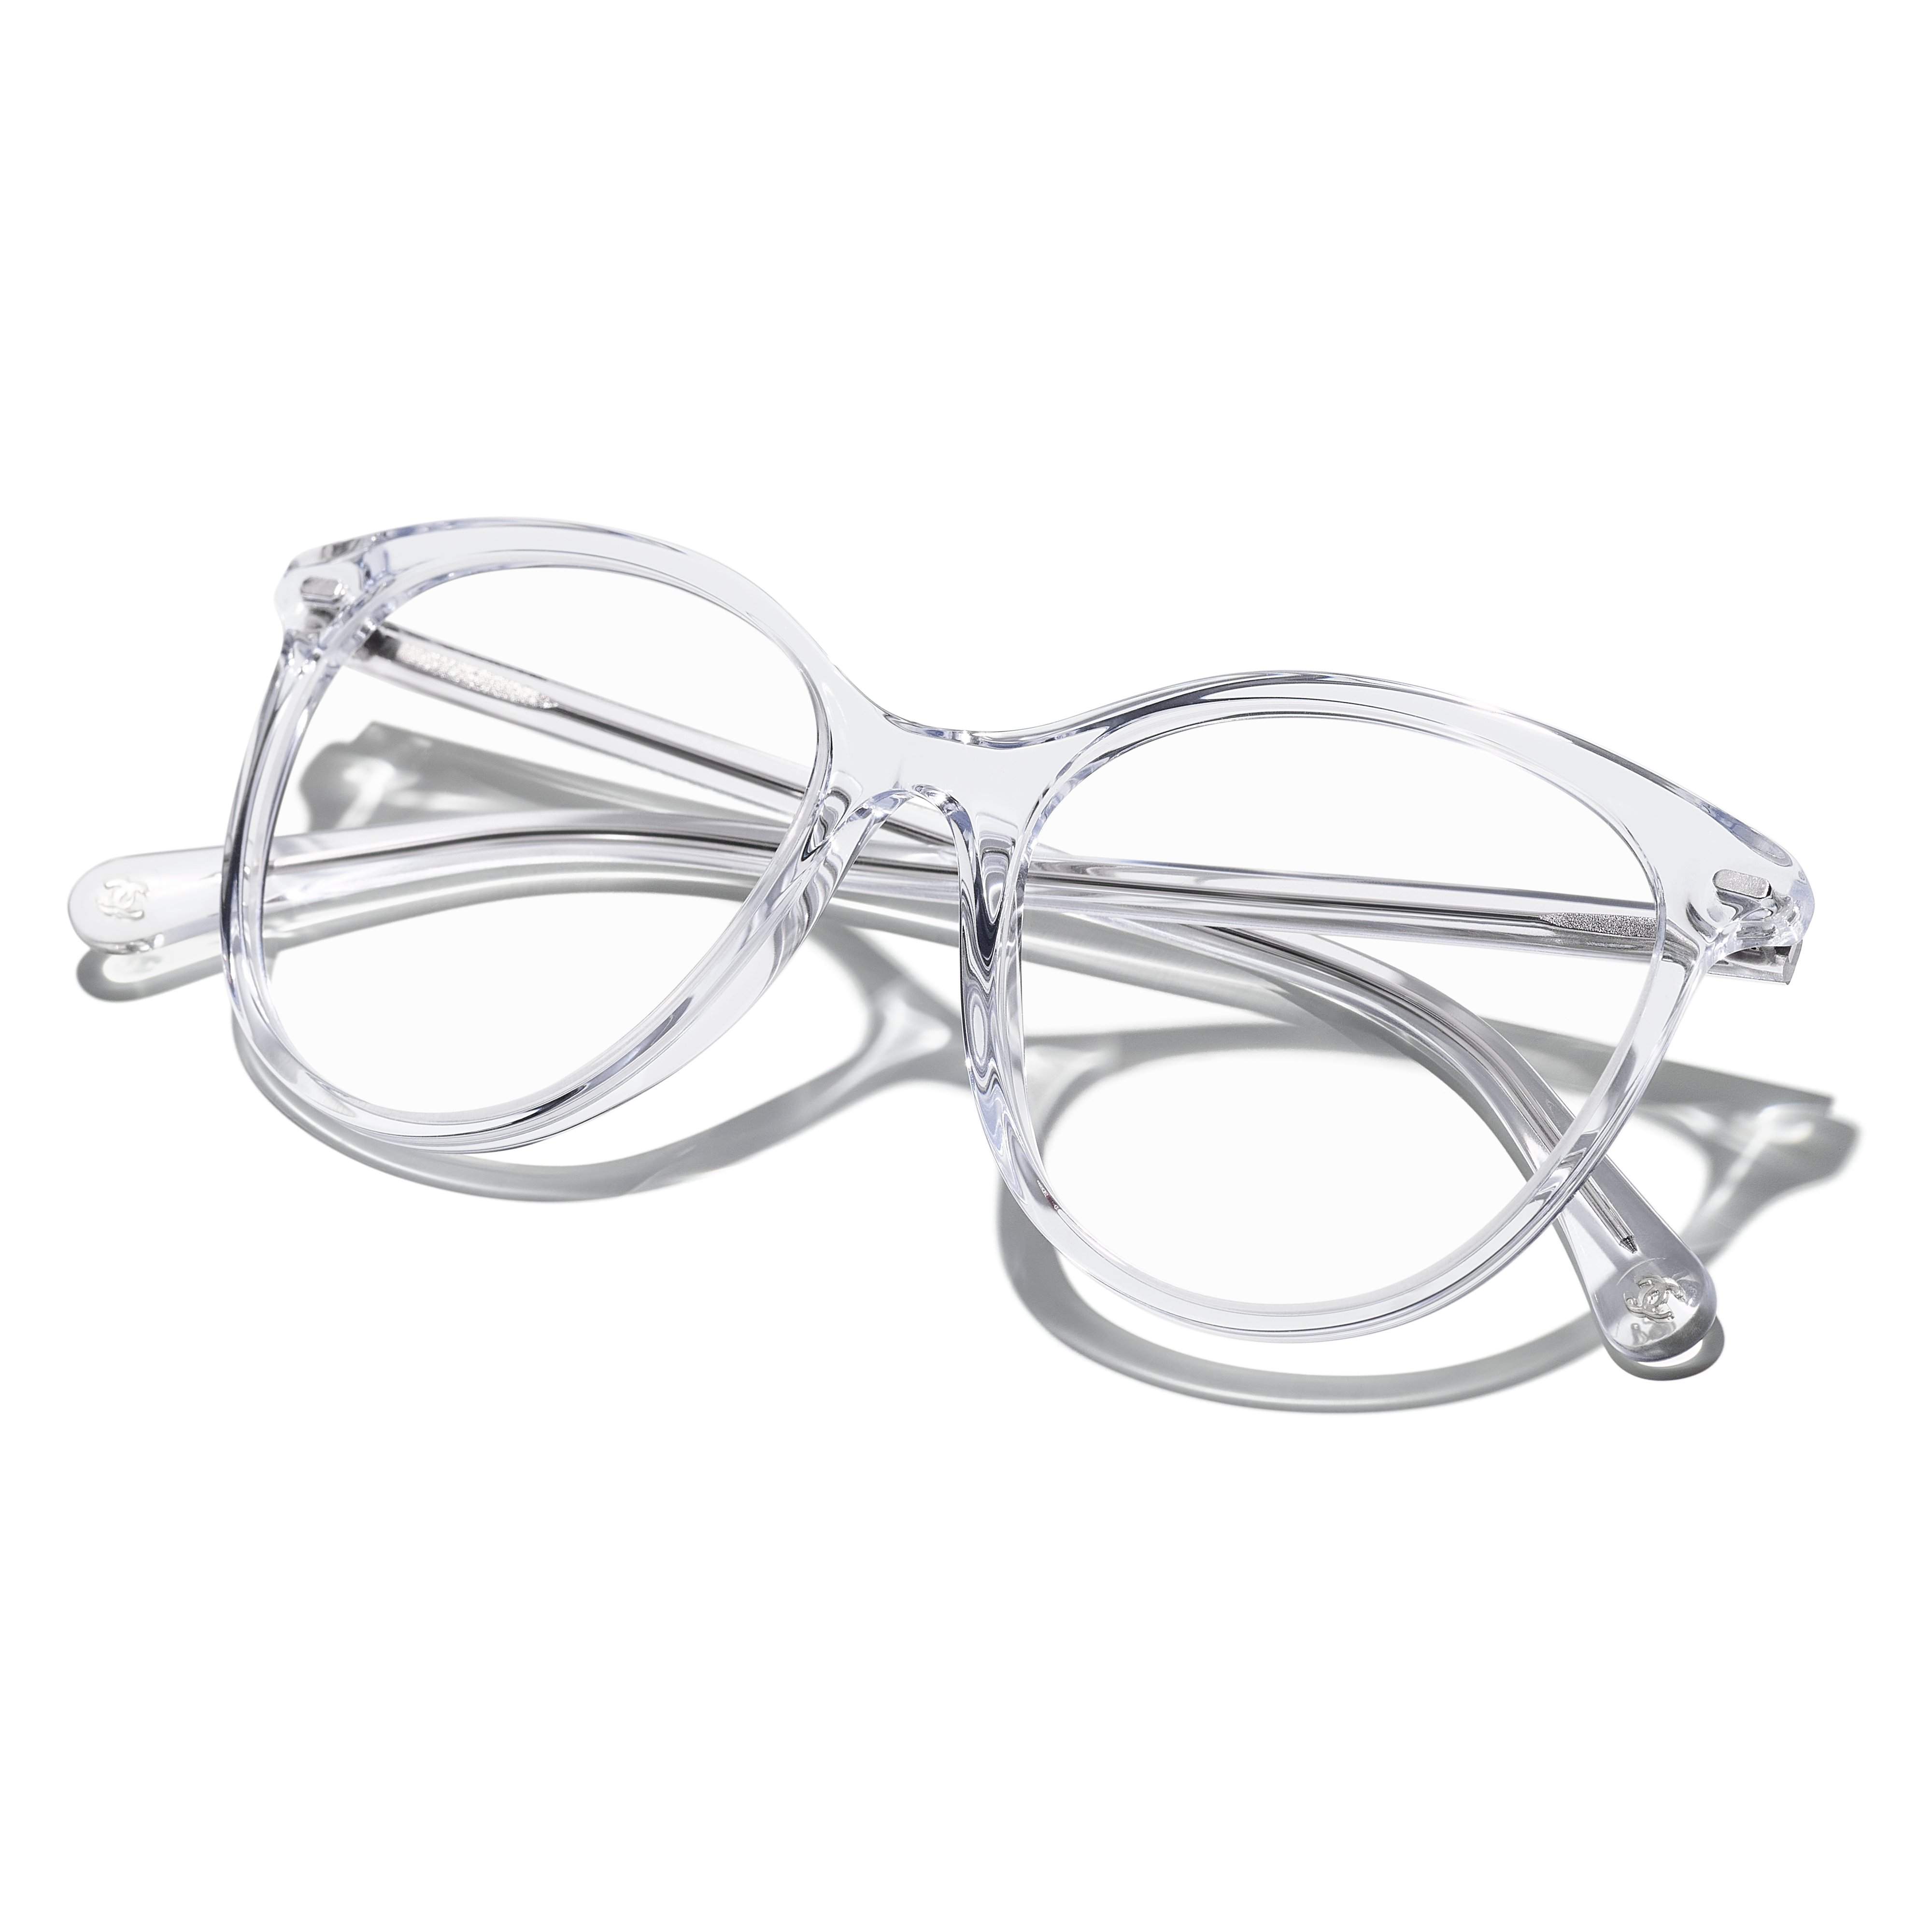 Eyeglasses CHANEL Signature Clear CH3412 C660 53-17 in stock | Price CHF  176.00 | Visiofactory